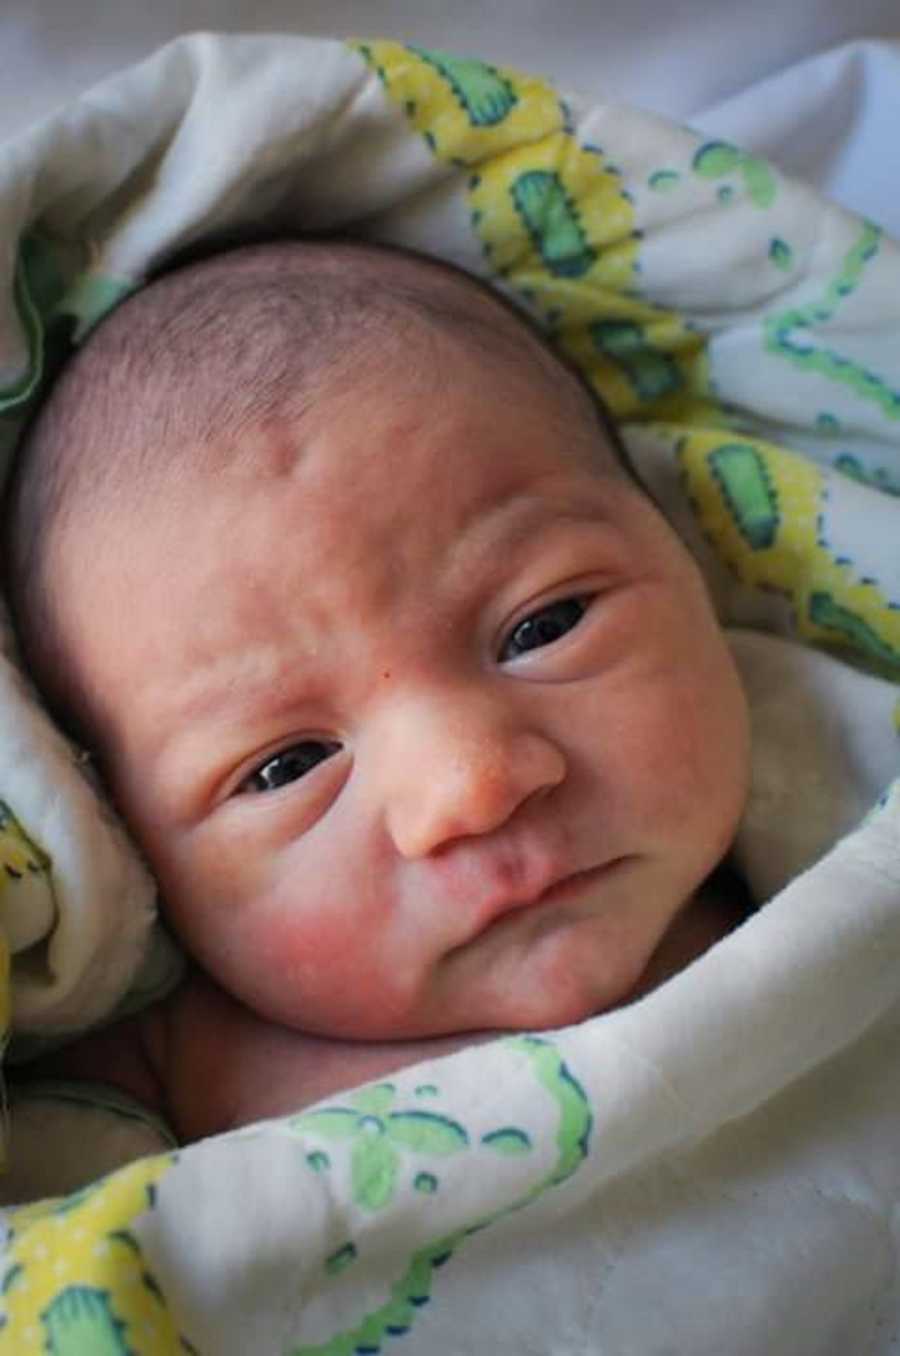 Close up of newborn baby's face who doctor's said he may have issues but doesn't